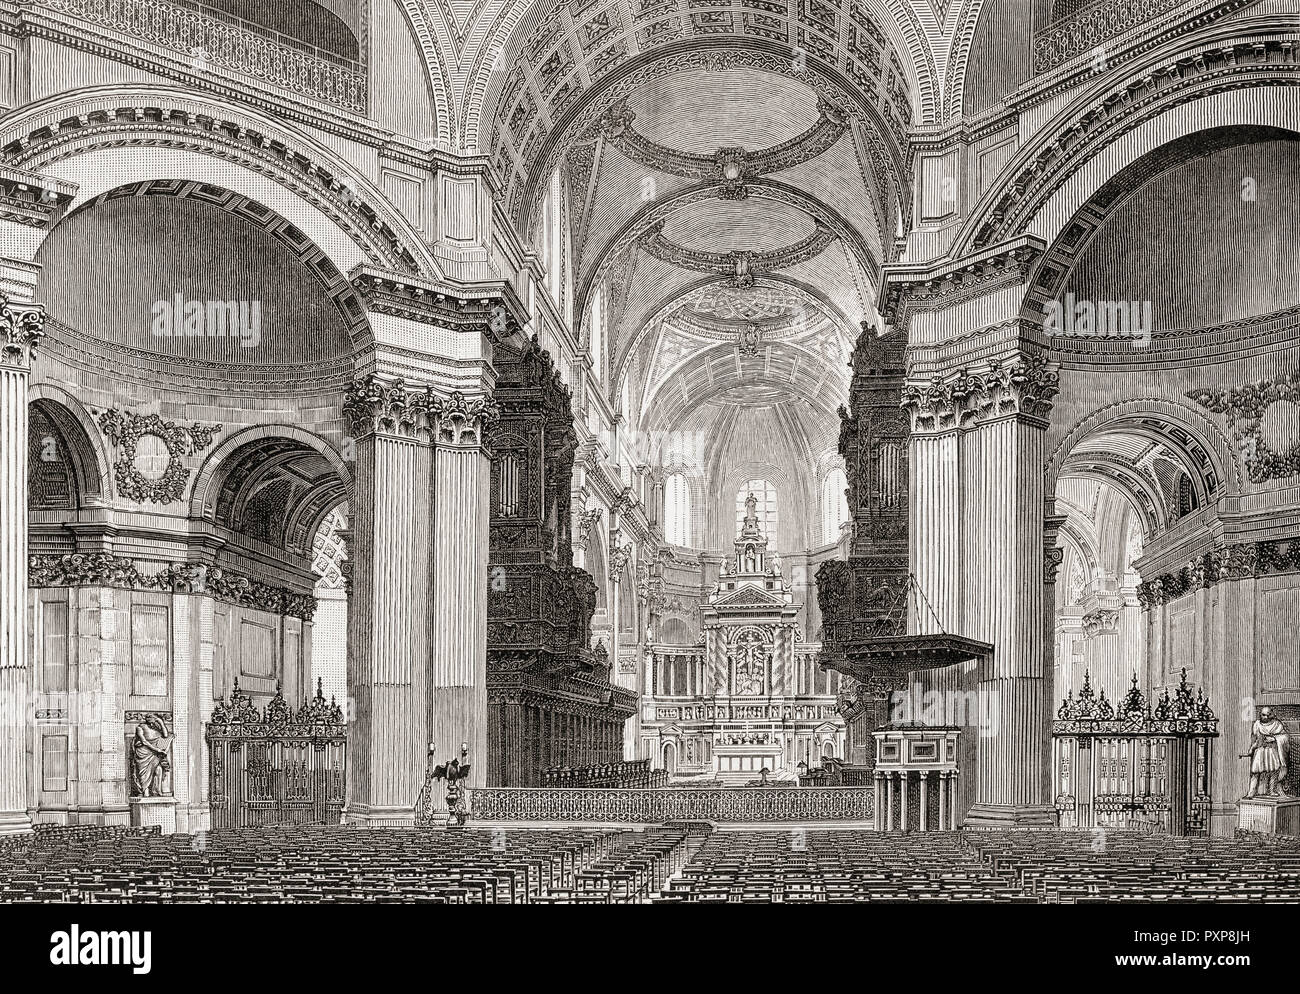 Interior of St. Pauls from under the dome, looking east. From London Pictures, published 1890. Stock Photo